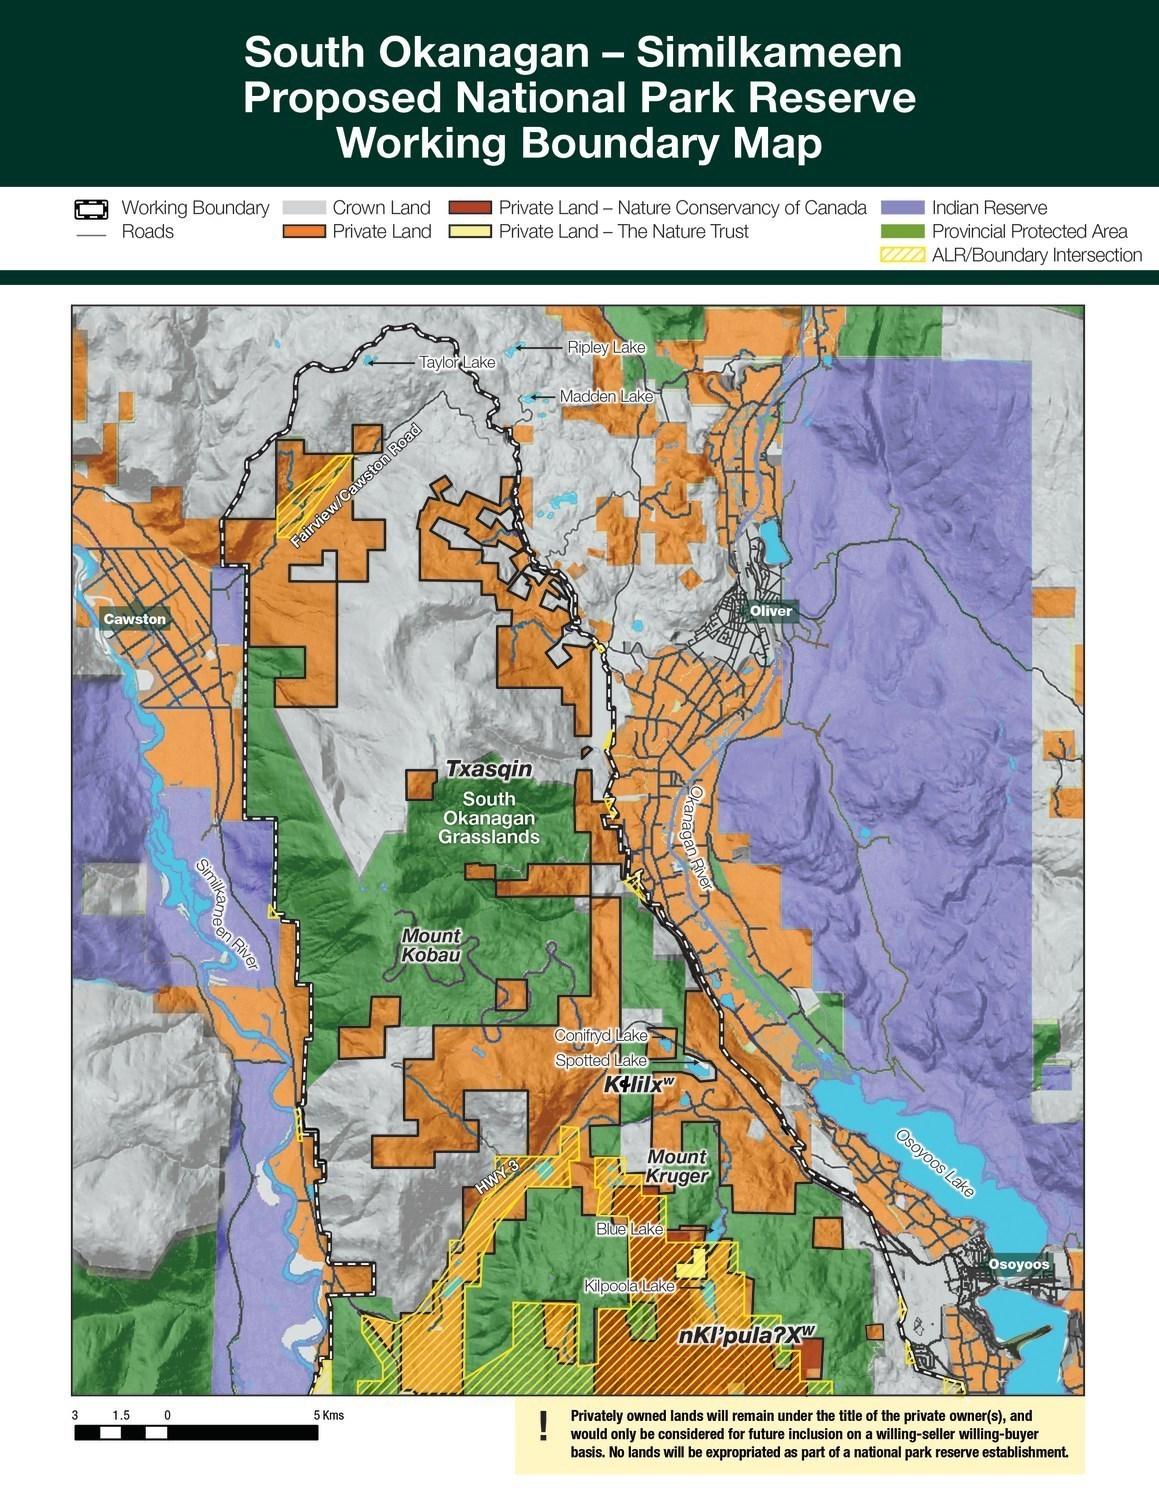 A map shows the proposed boundaries of South Okanagan-Similkameen National Park Reserve.